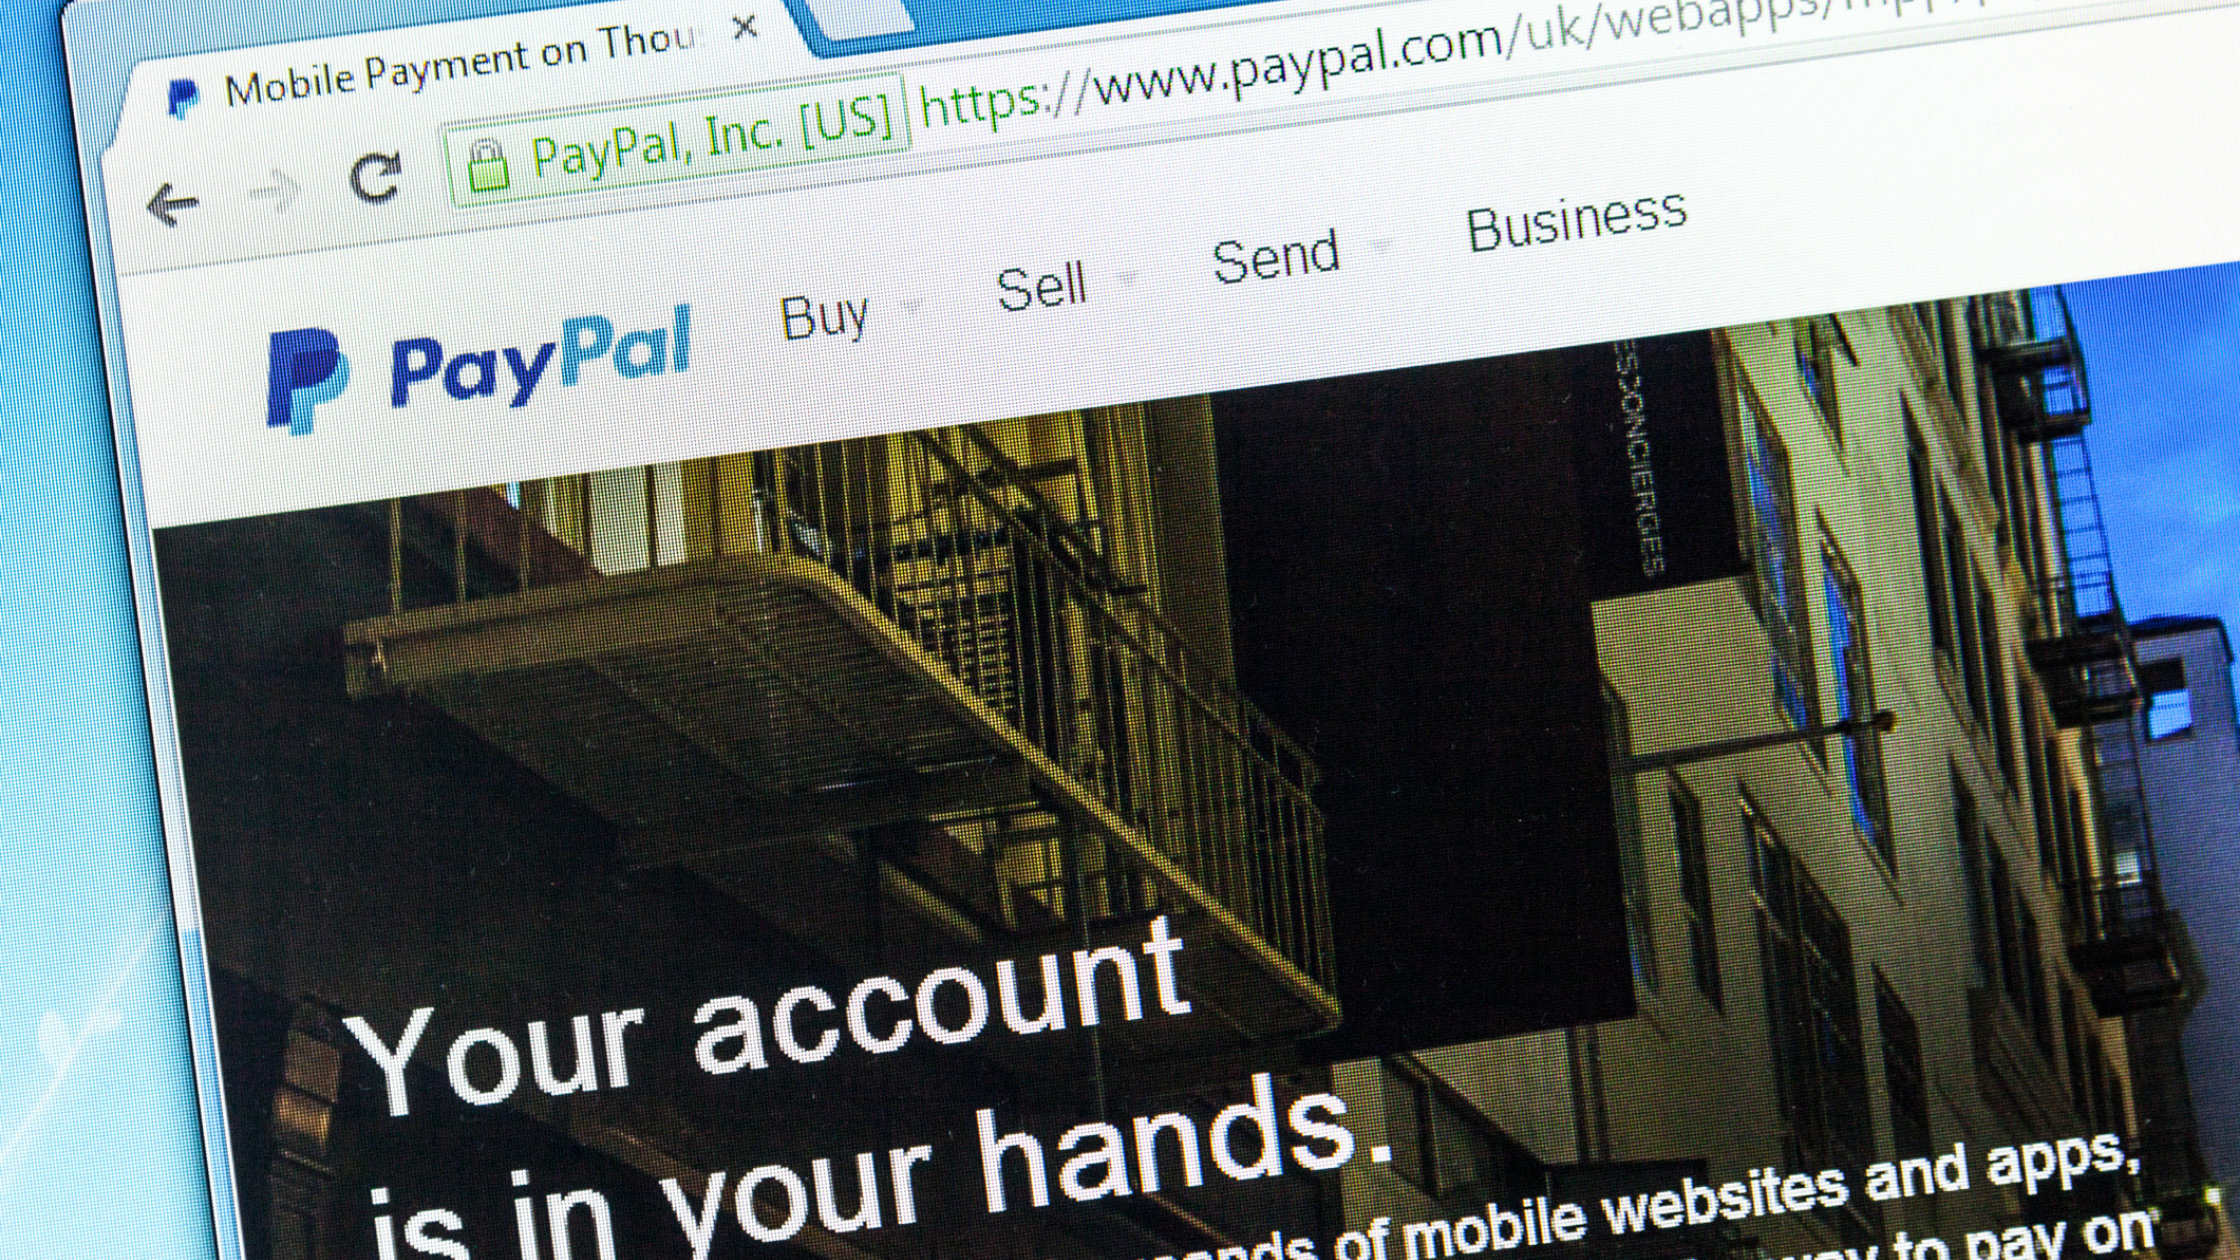 PayPal Smashes Earnings: Why Did the Stock Fall?